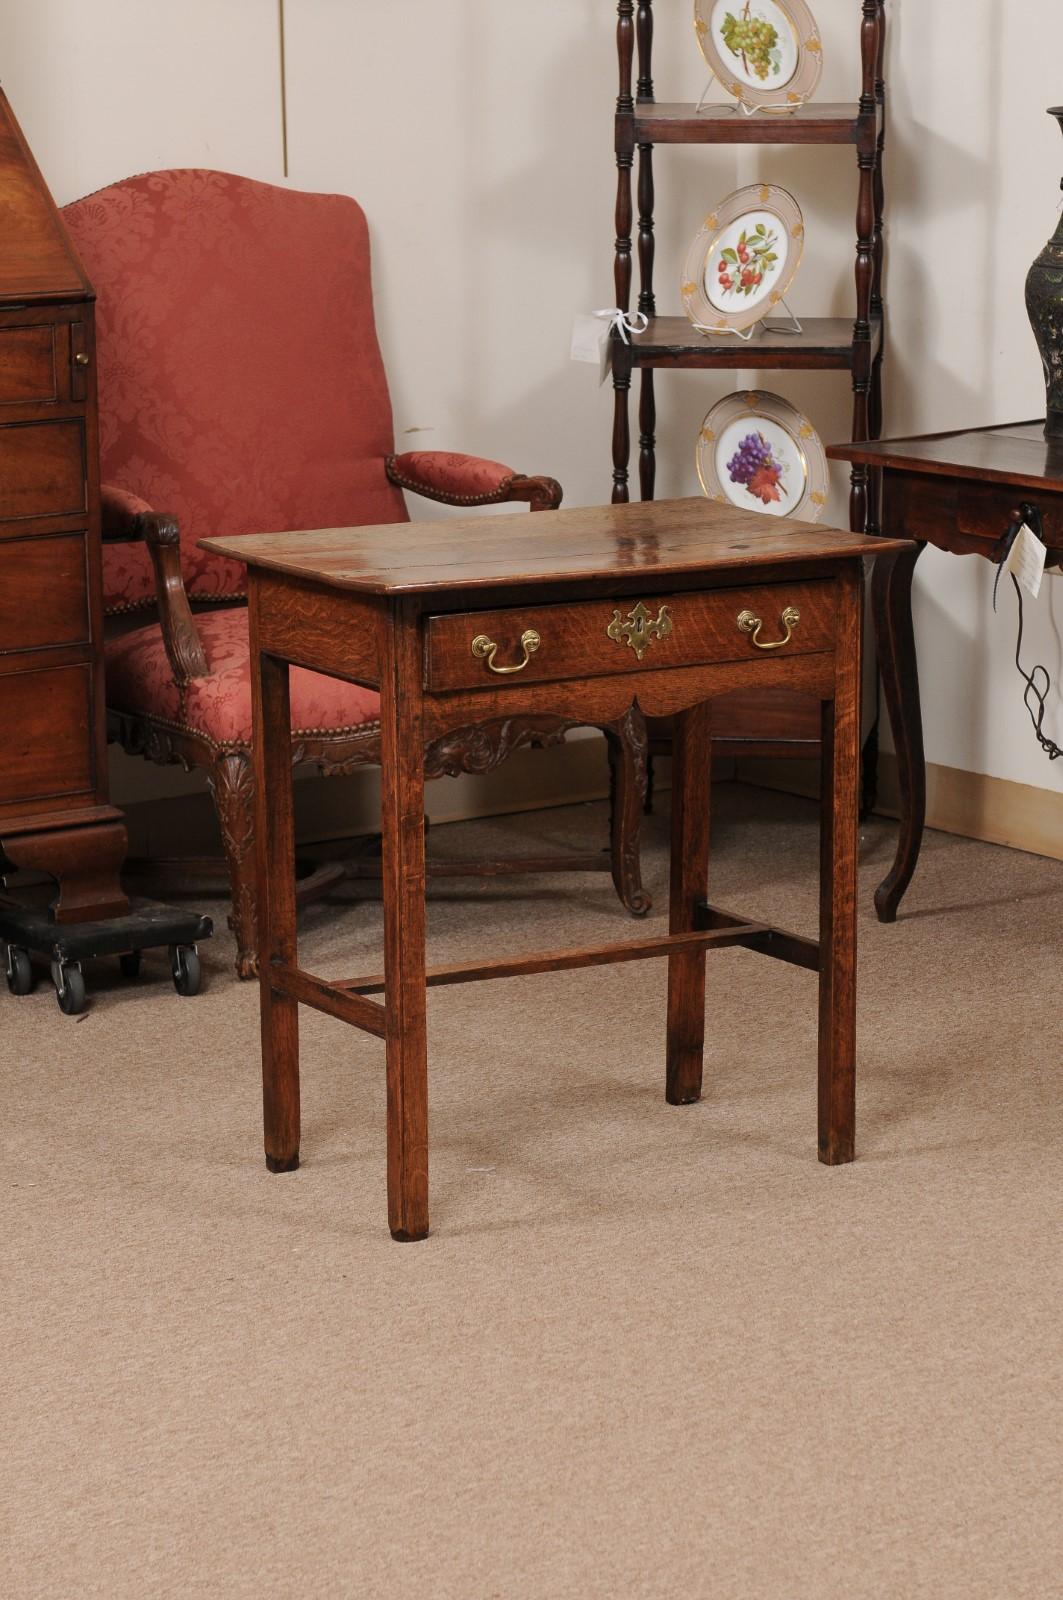 19th Century English Oak Side Table with Drawer and H form Stretcher, ca. 1800 For Sale